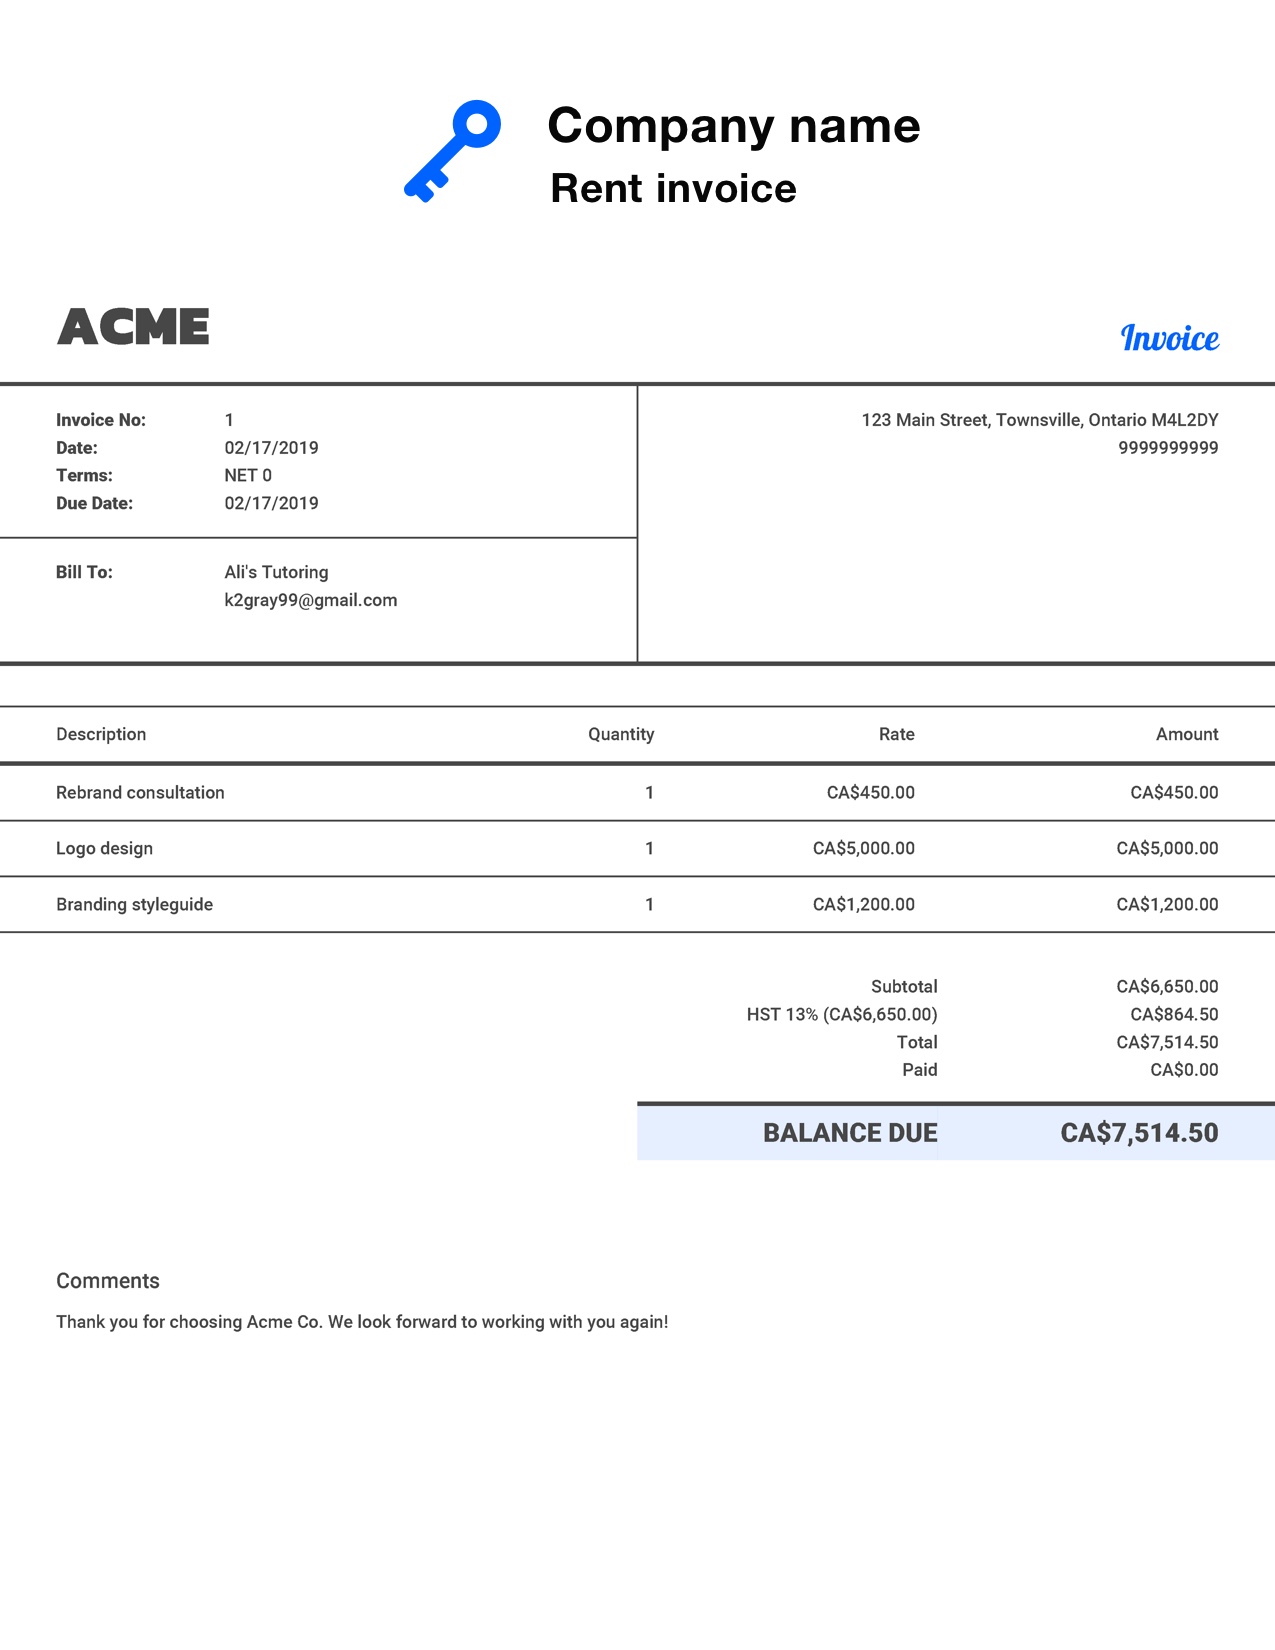 Free Rent Invoice Template. Customize and Send in 90 Seconds